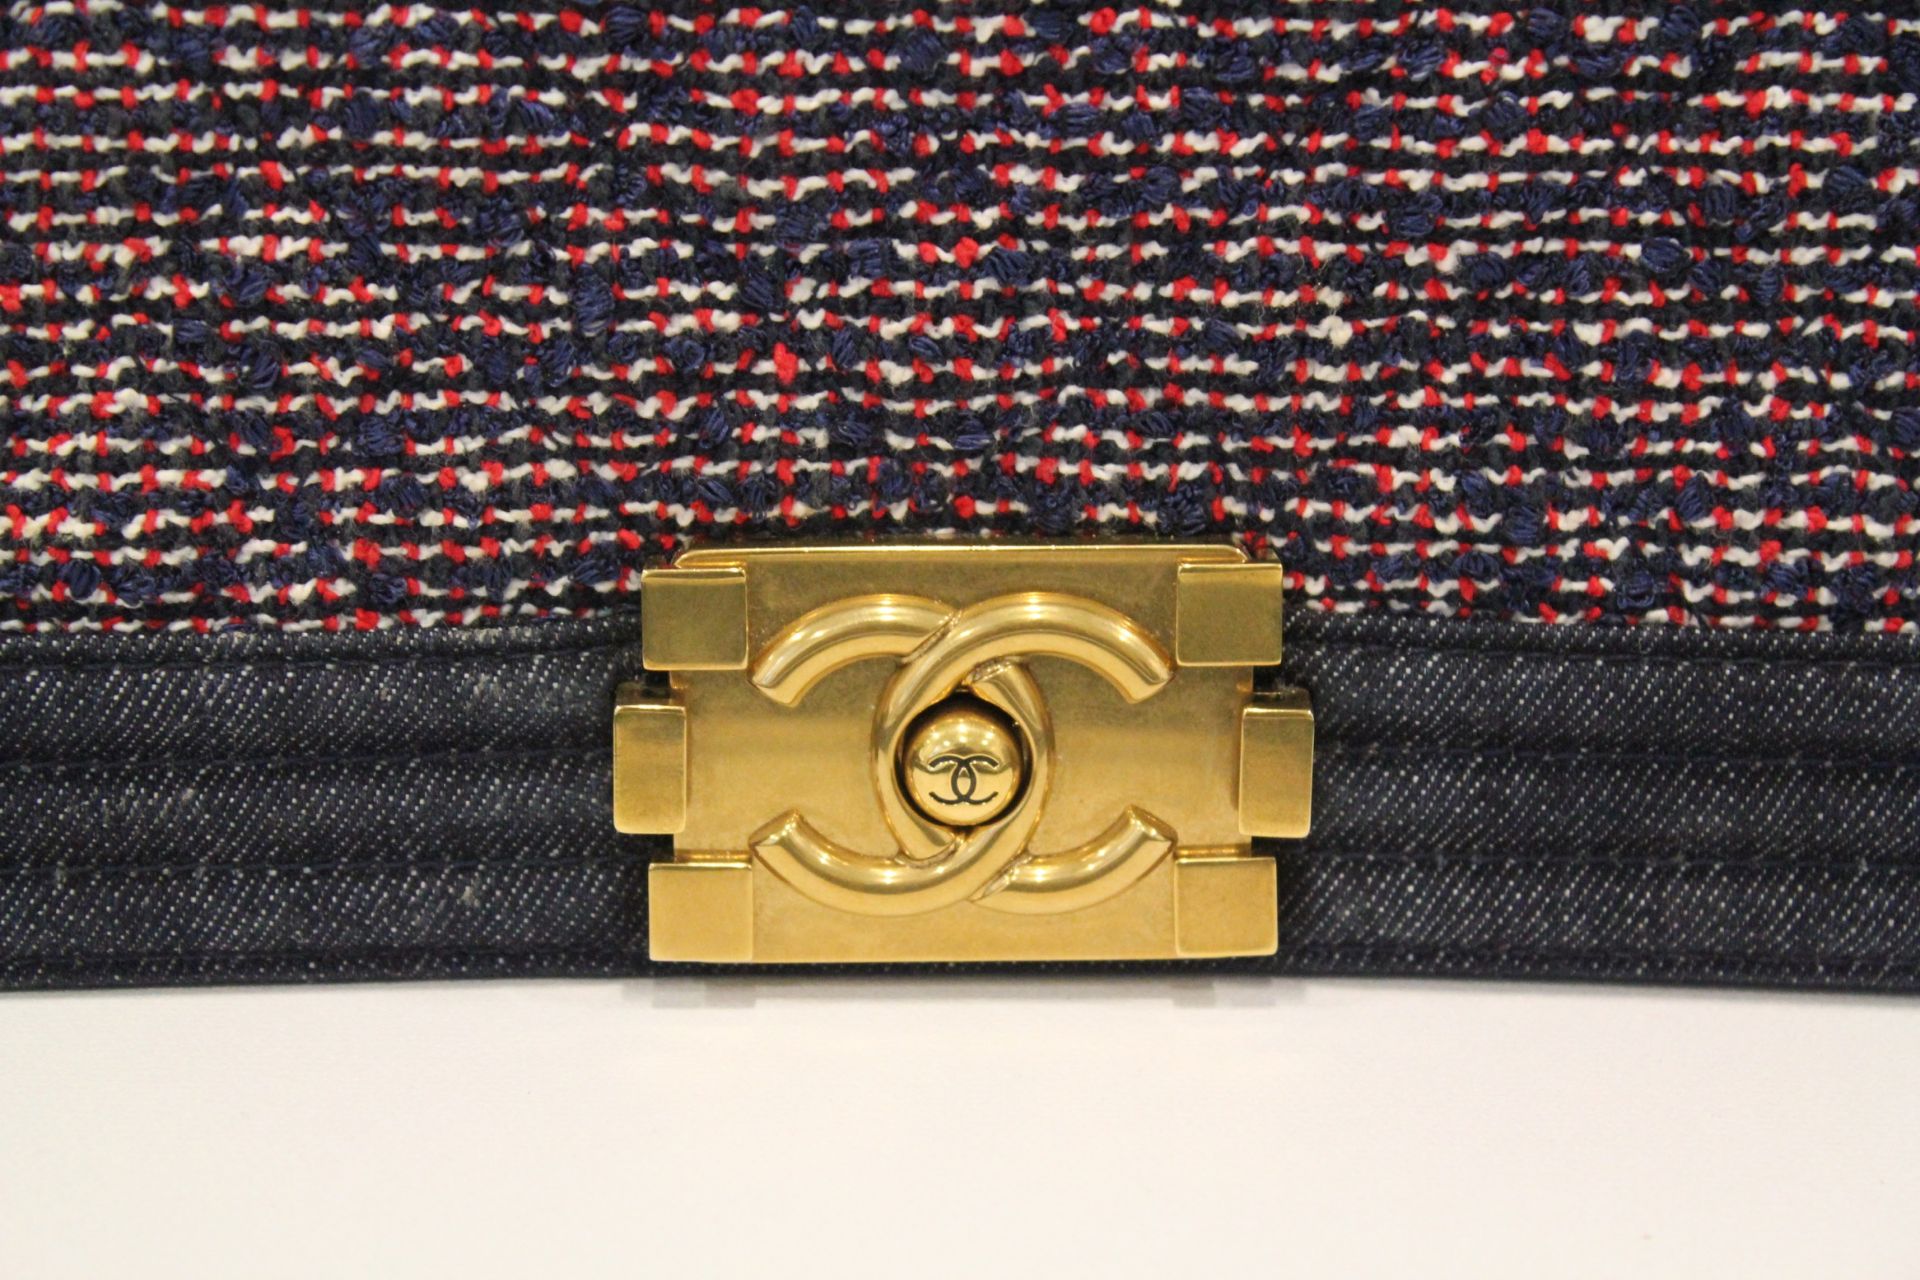 CHANEL Special Edition Le Boy Bag _ (New Medium Size) _ Denim|Leather|Tweed - Image 7 of 10